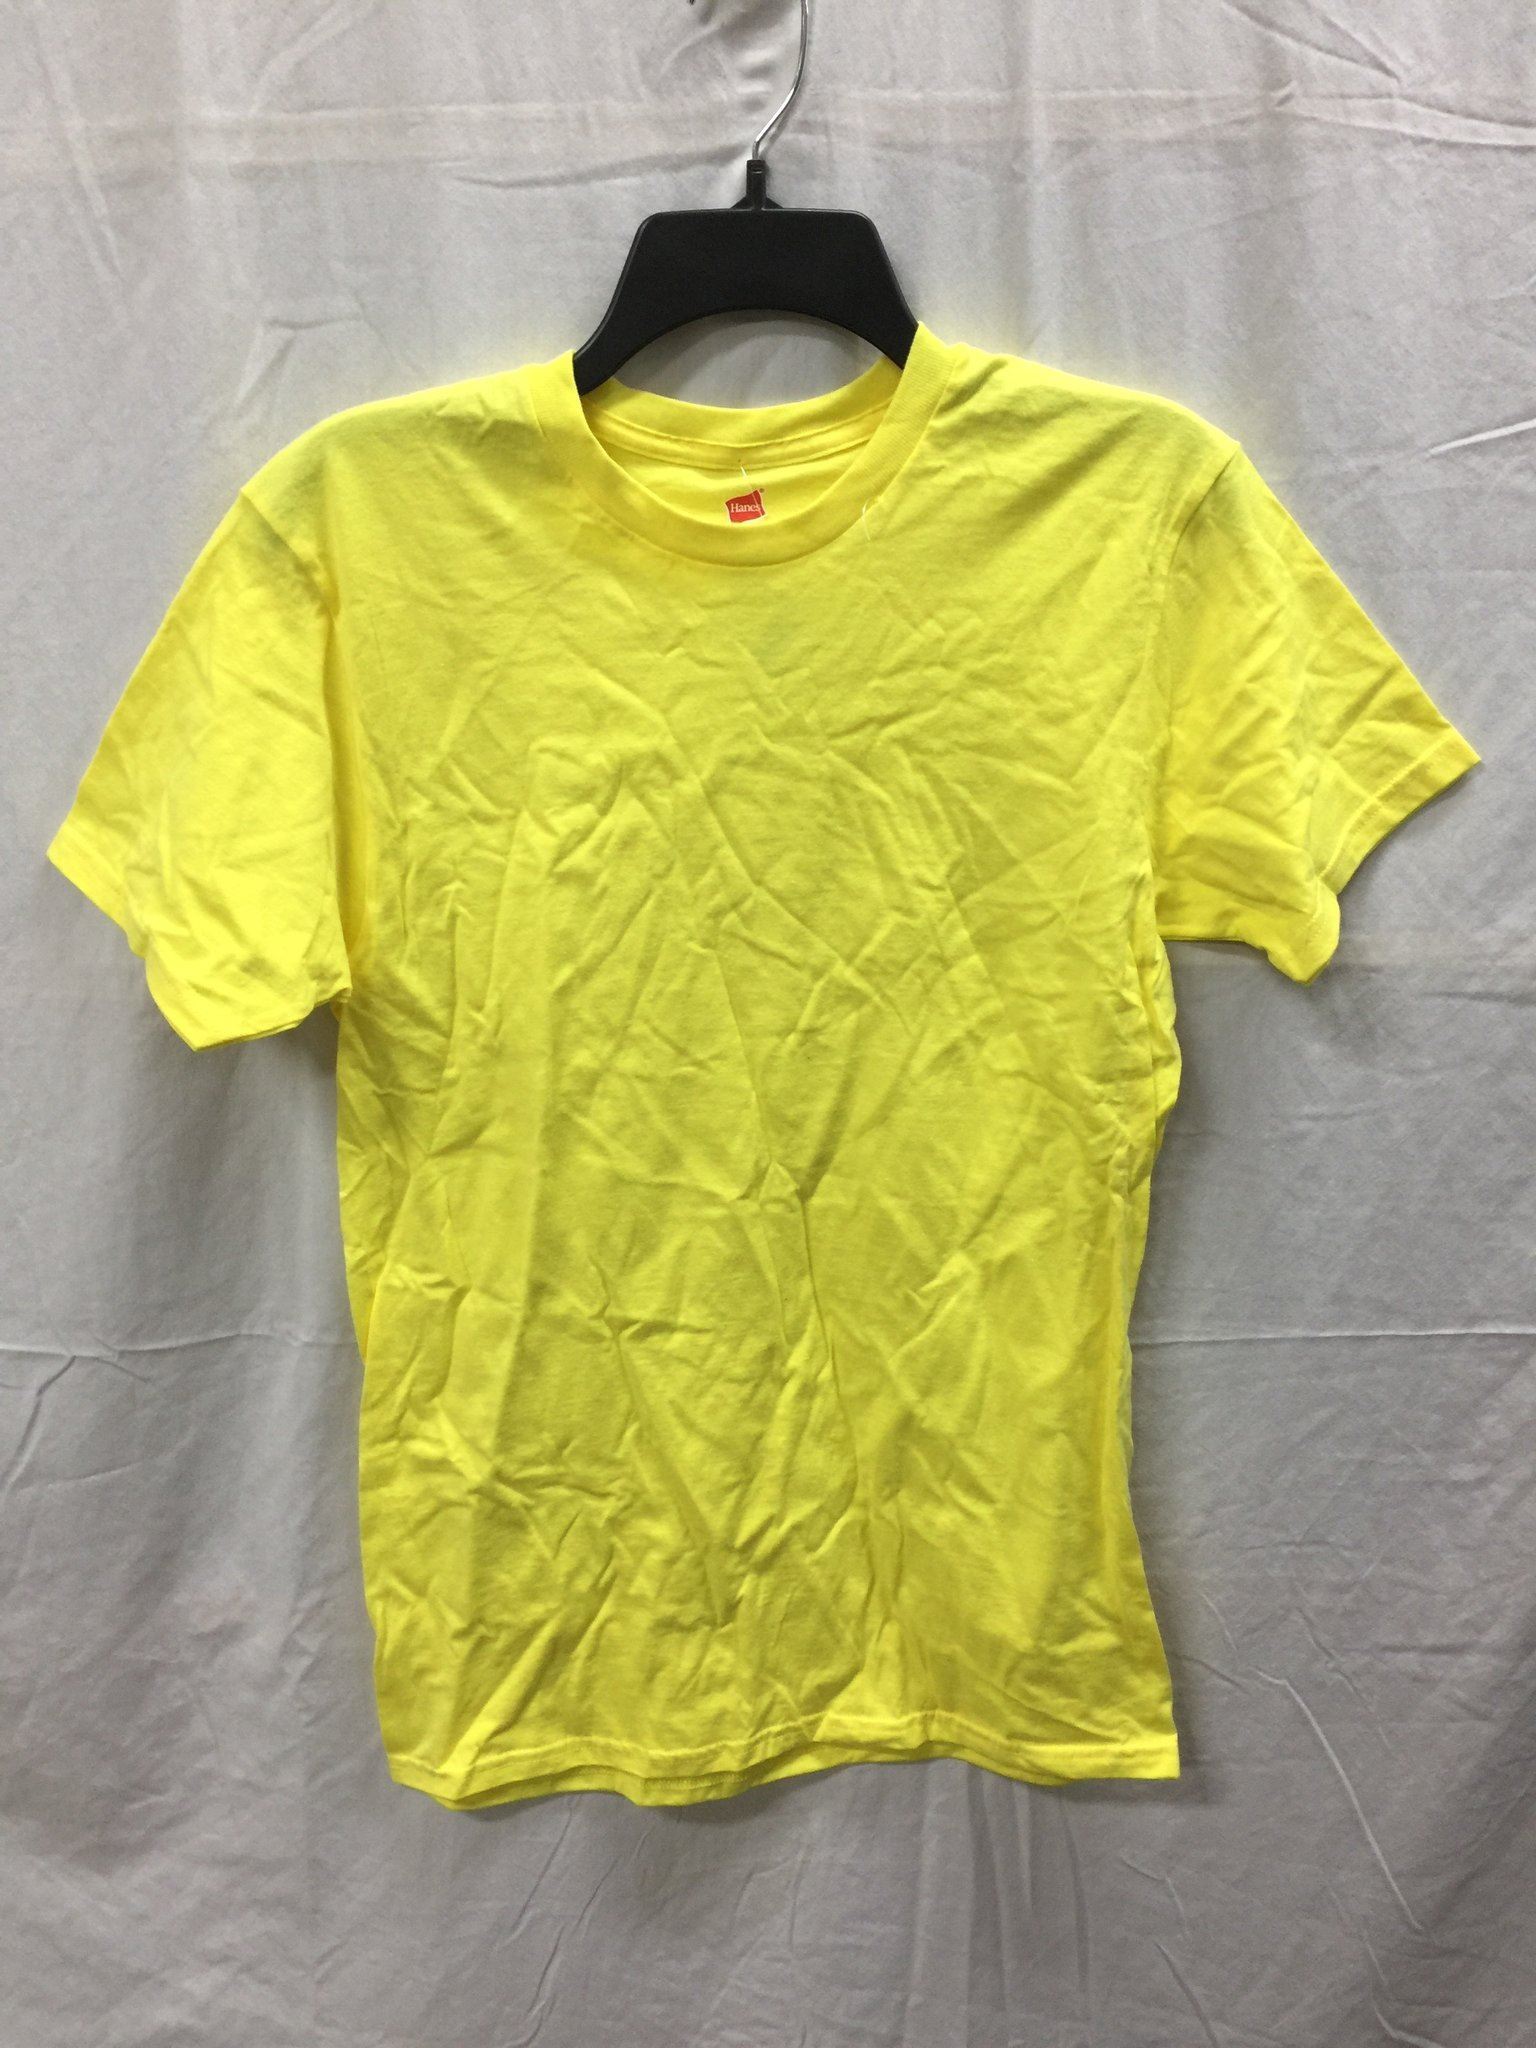 HANES CREWNECK TSHIRT BRIGHT YELLOW S -NEW WITHOUT TAG 3966 | eBay